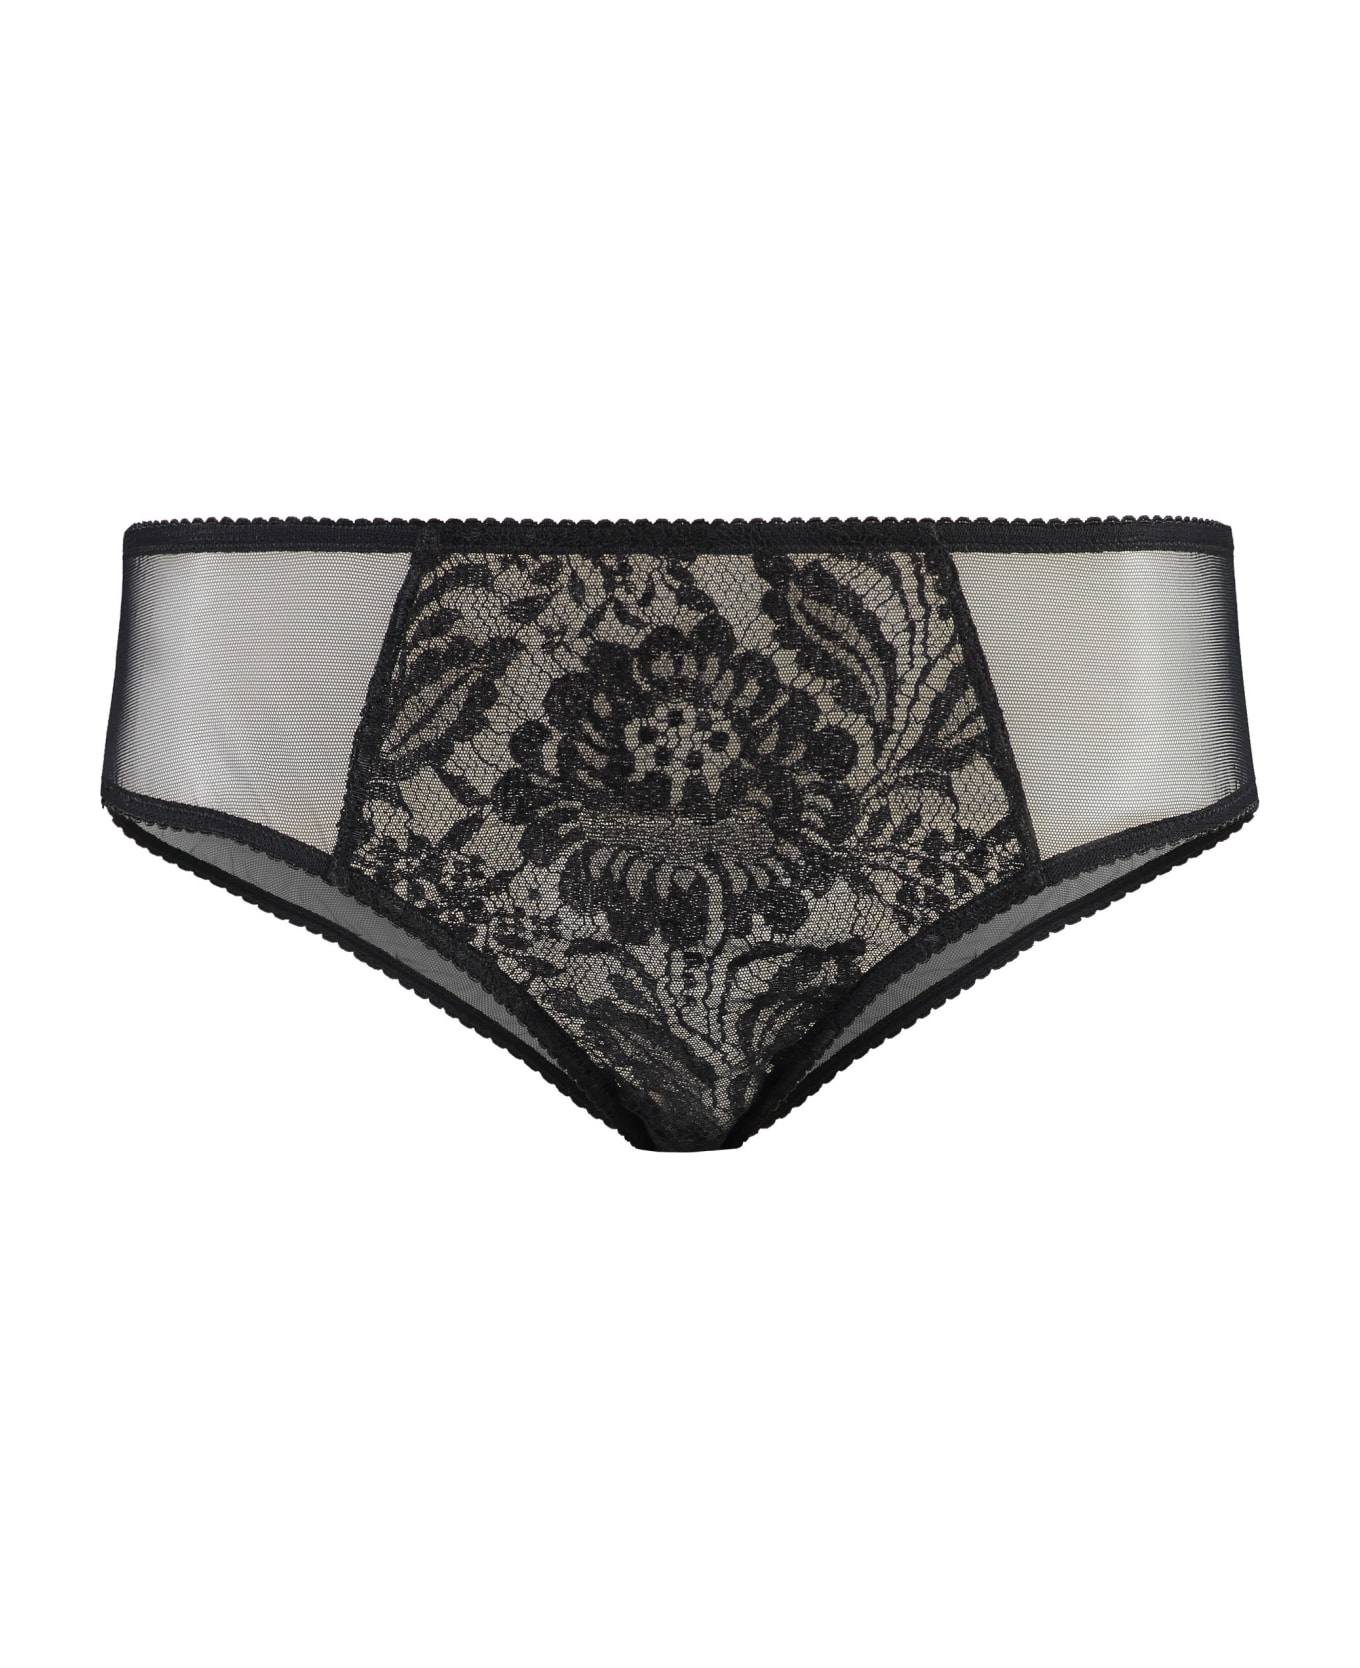 Dolce & Gabbana Lace And Tulle Panties - Black